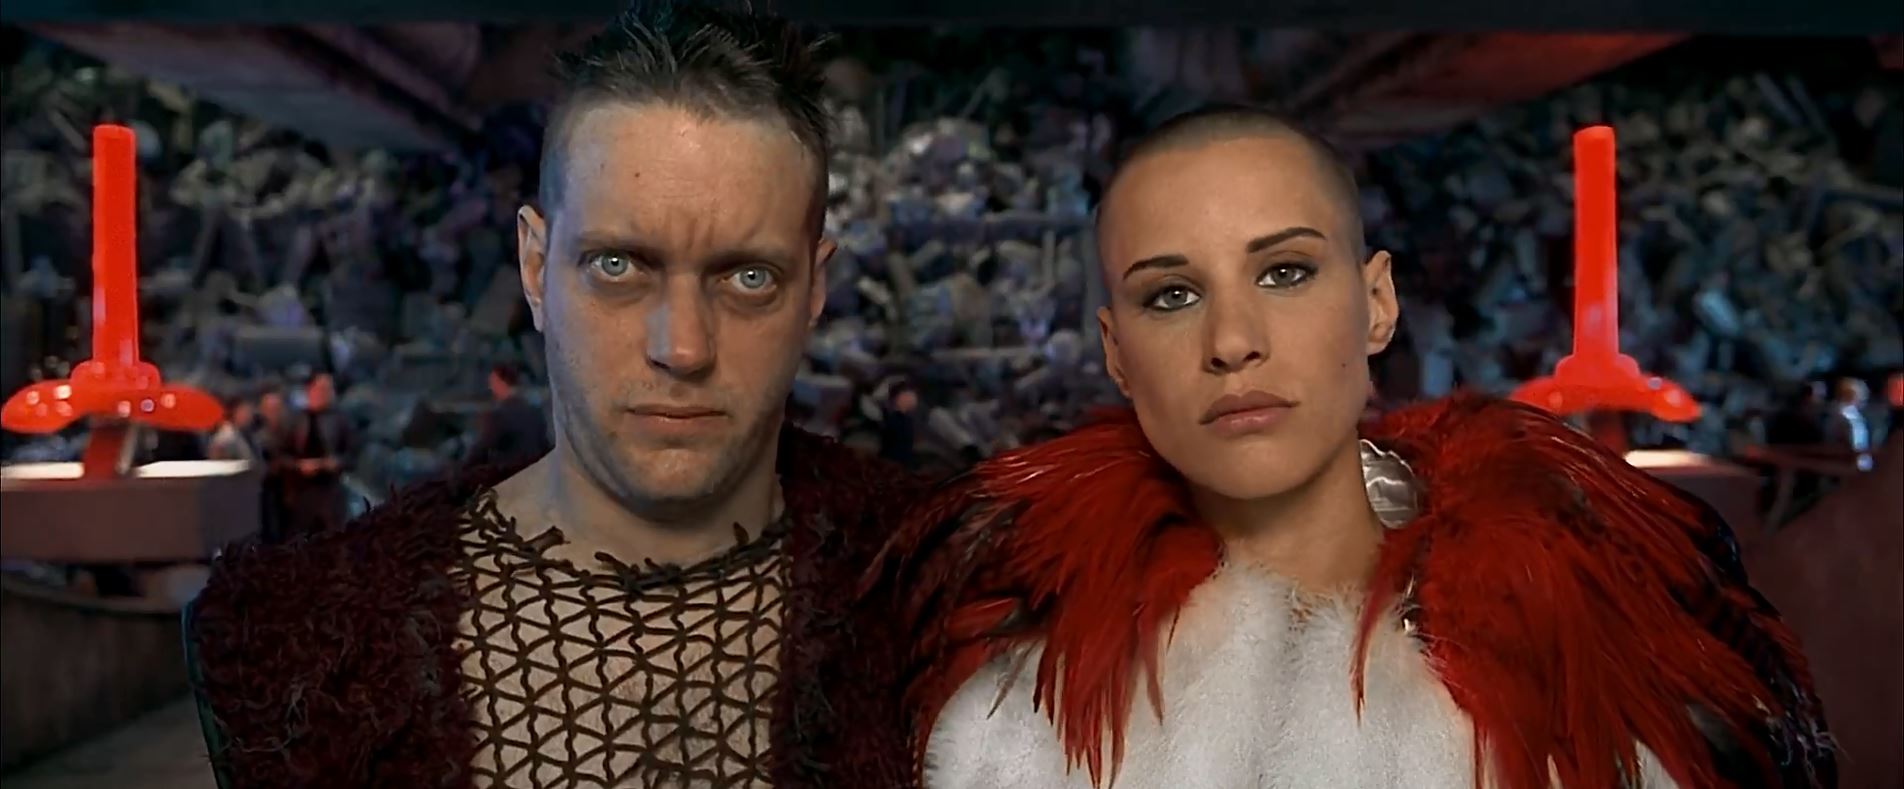 Eve salvail fifth element